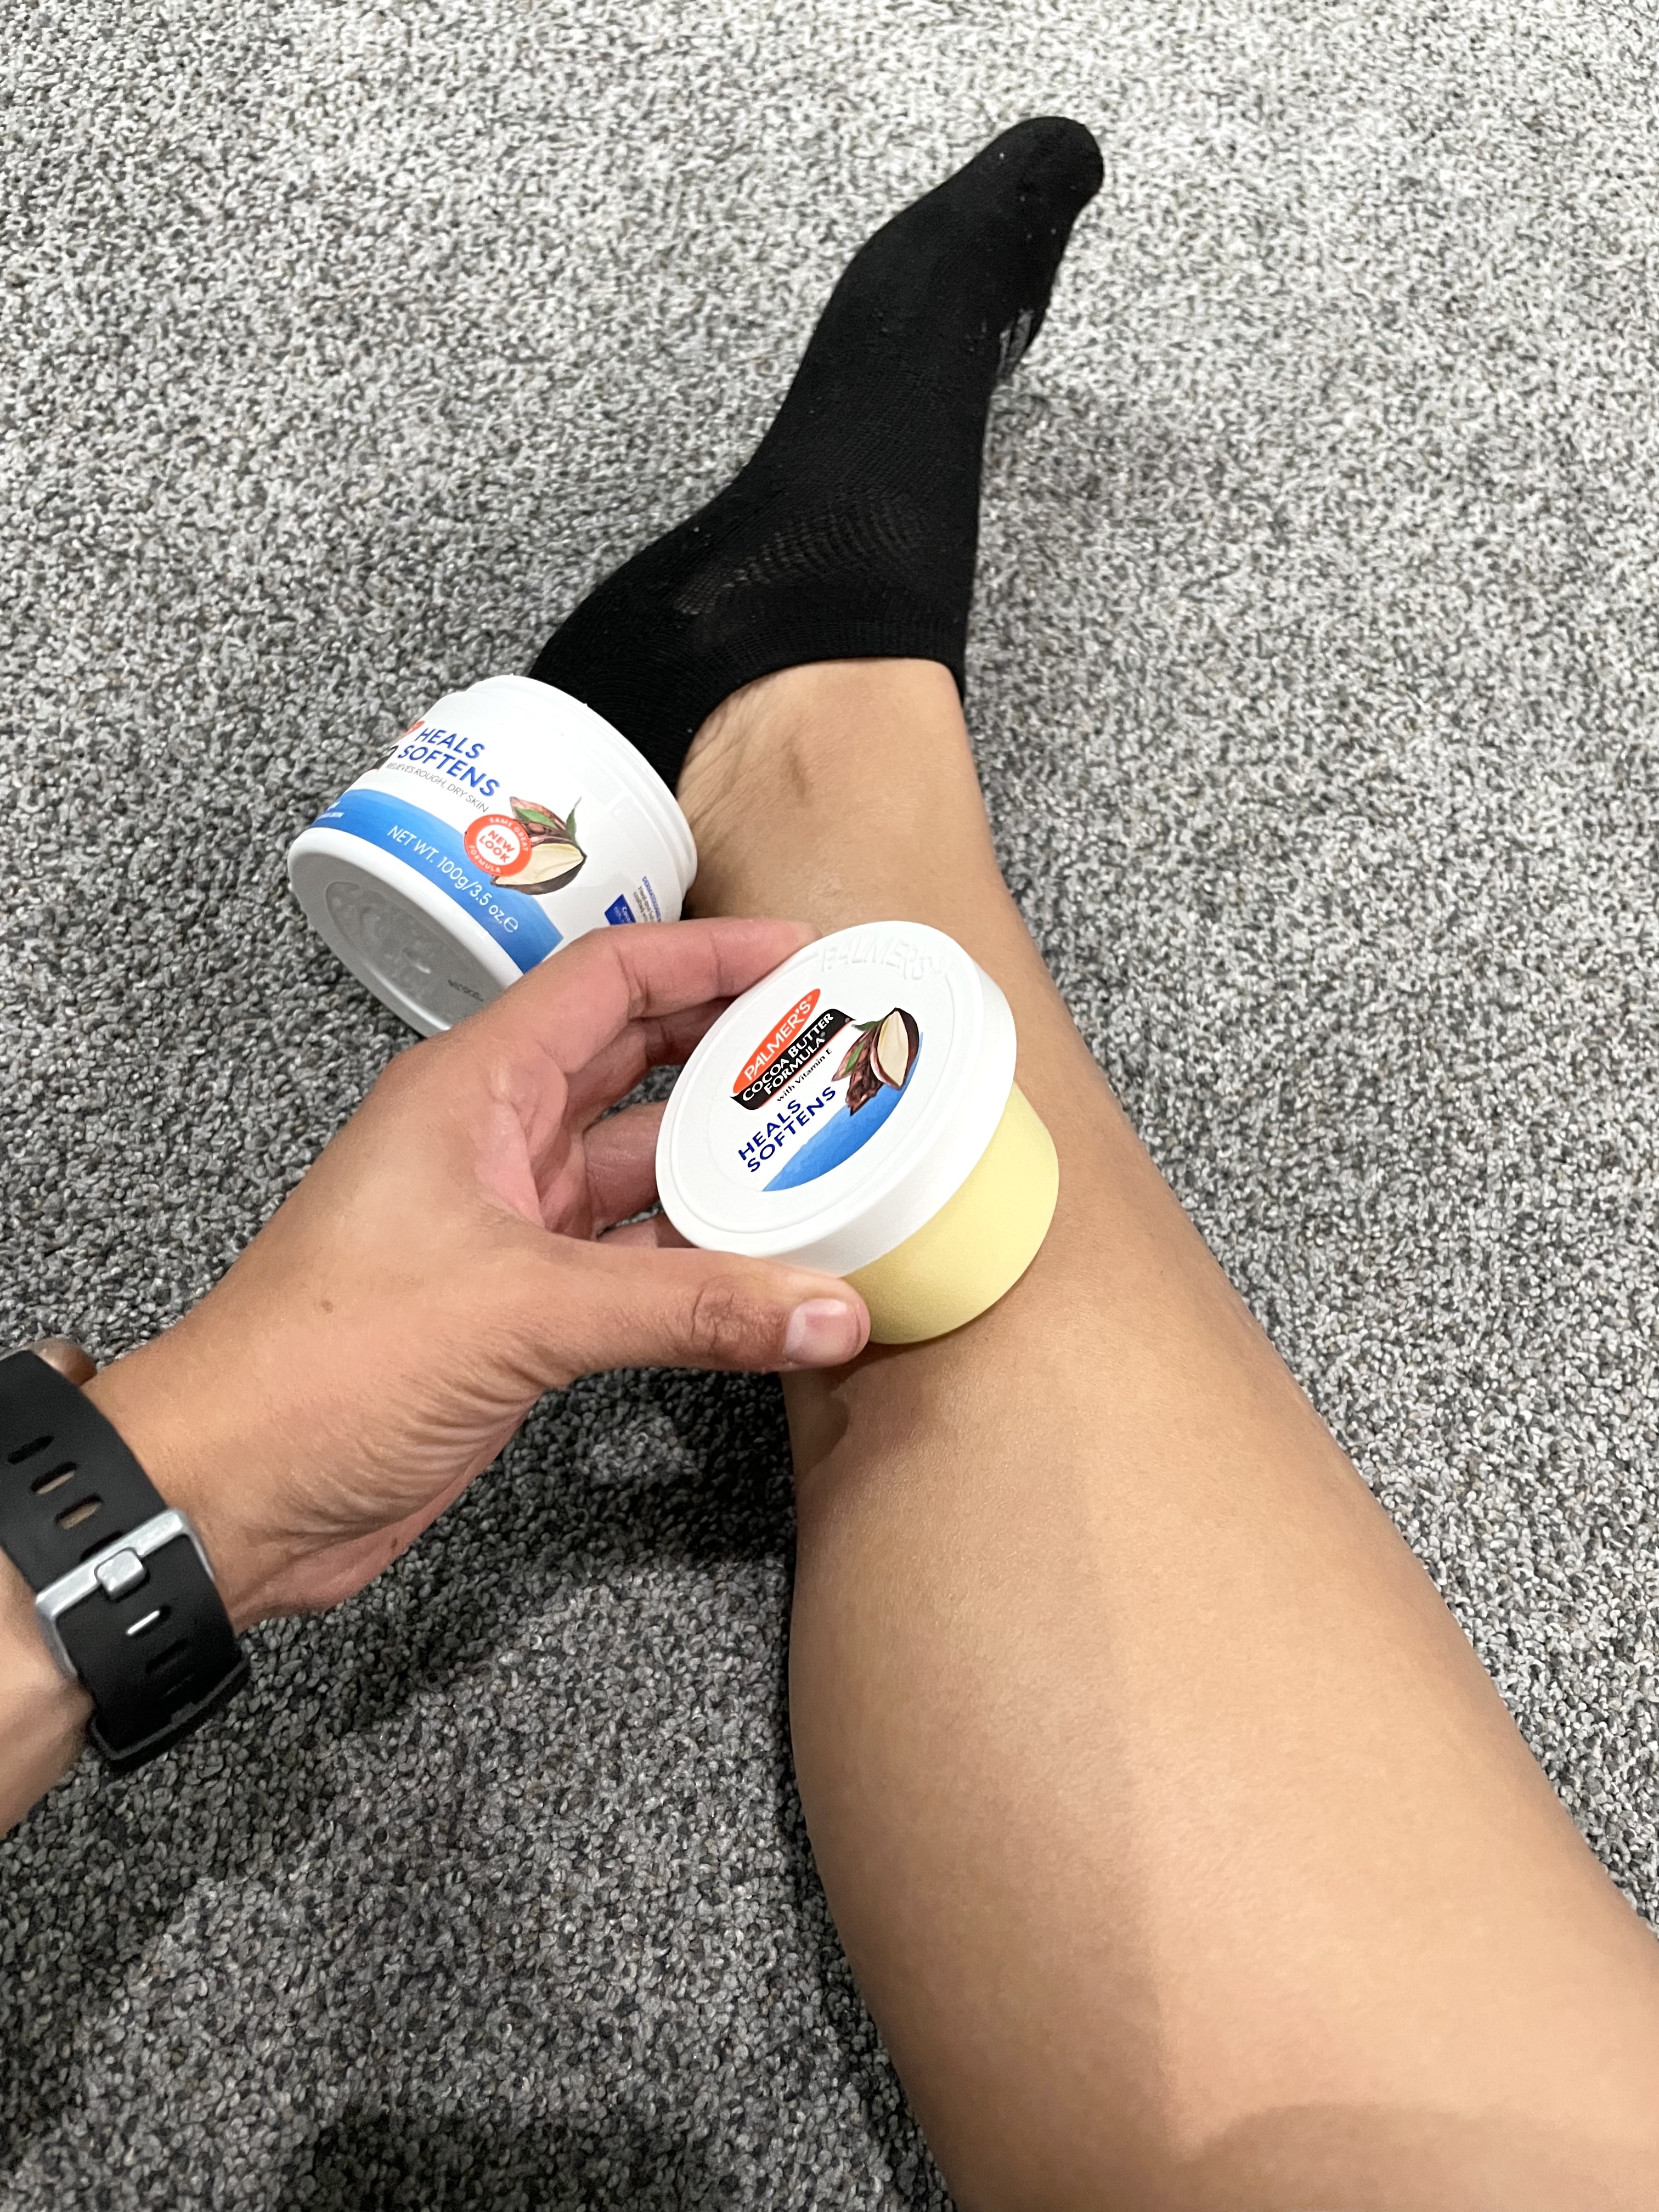 Woman applying dry skin solution, Palmer's Cocoa Butter Formula Original Solid Jar to her leg